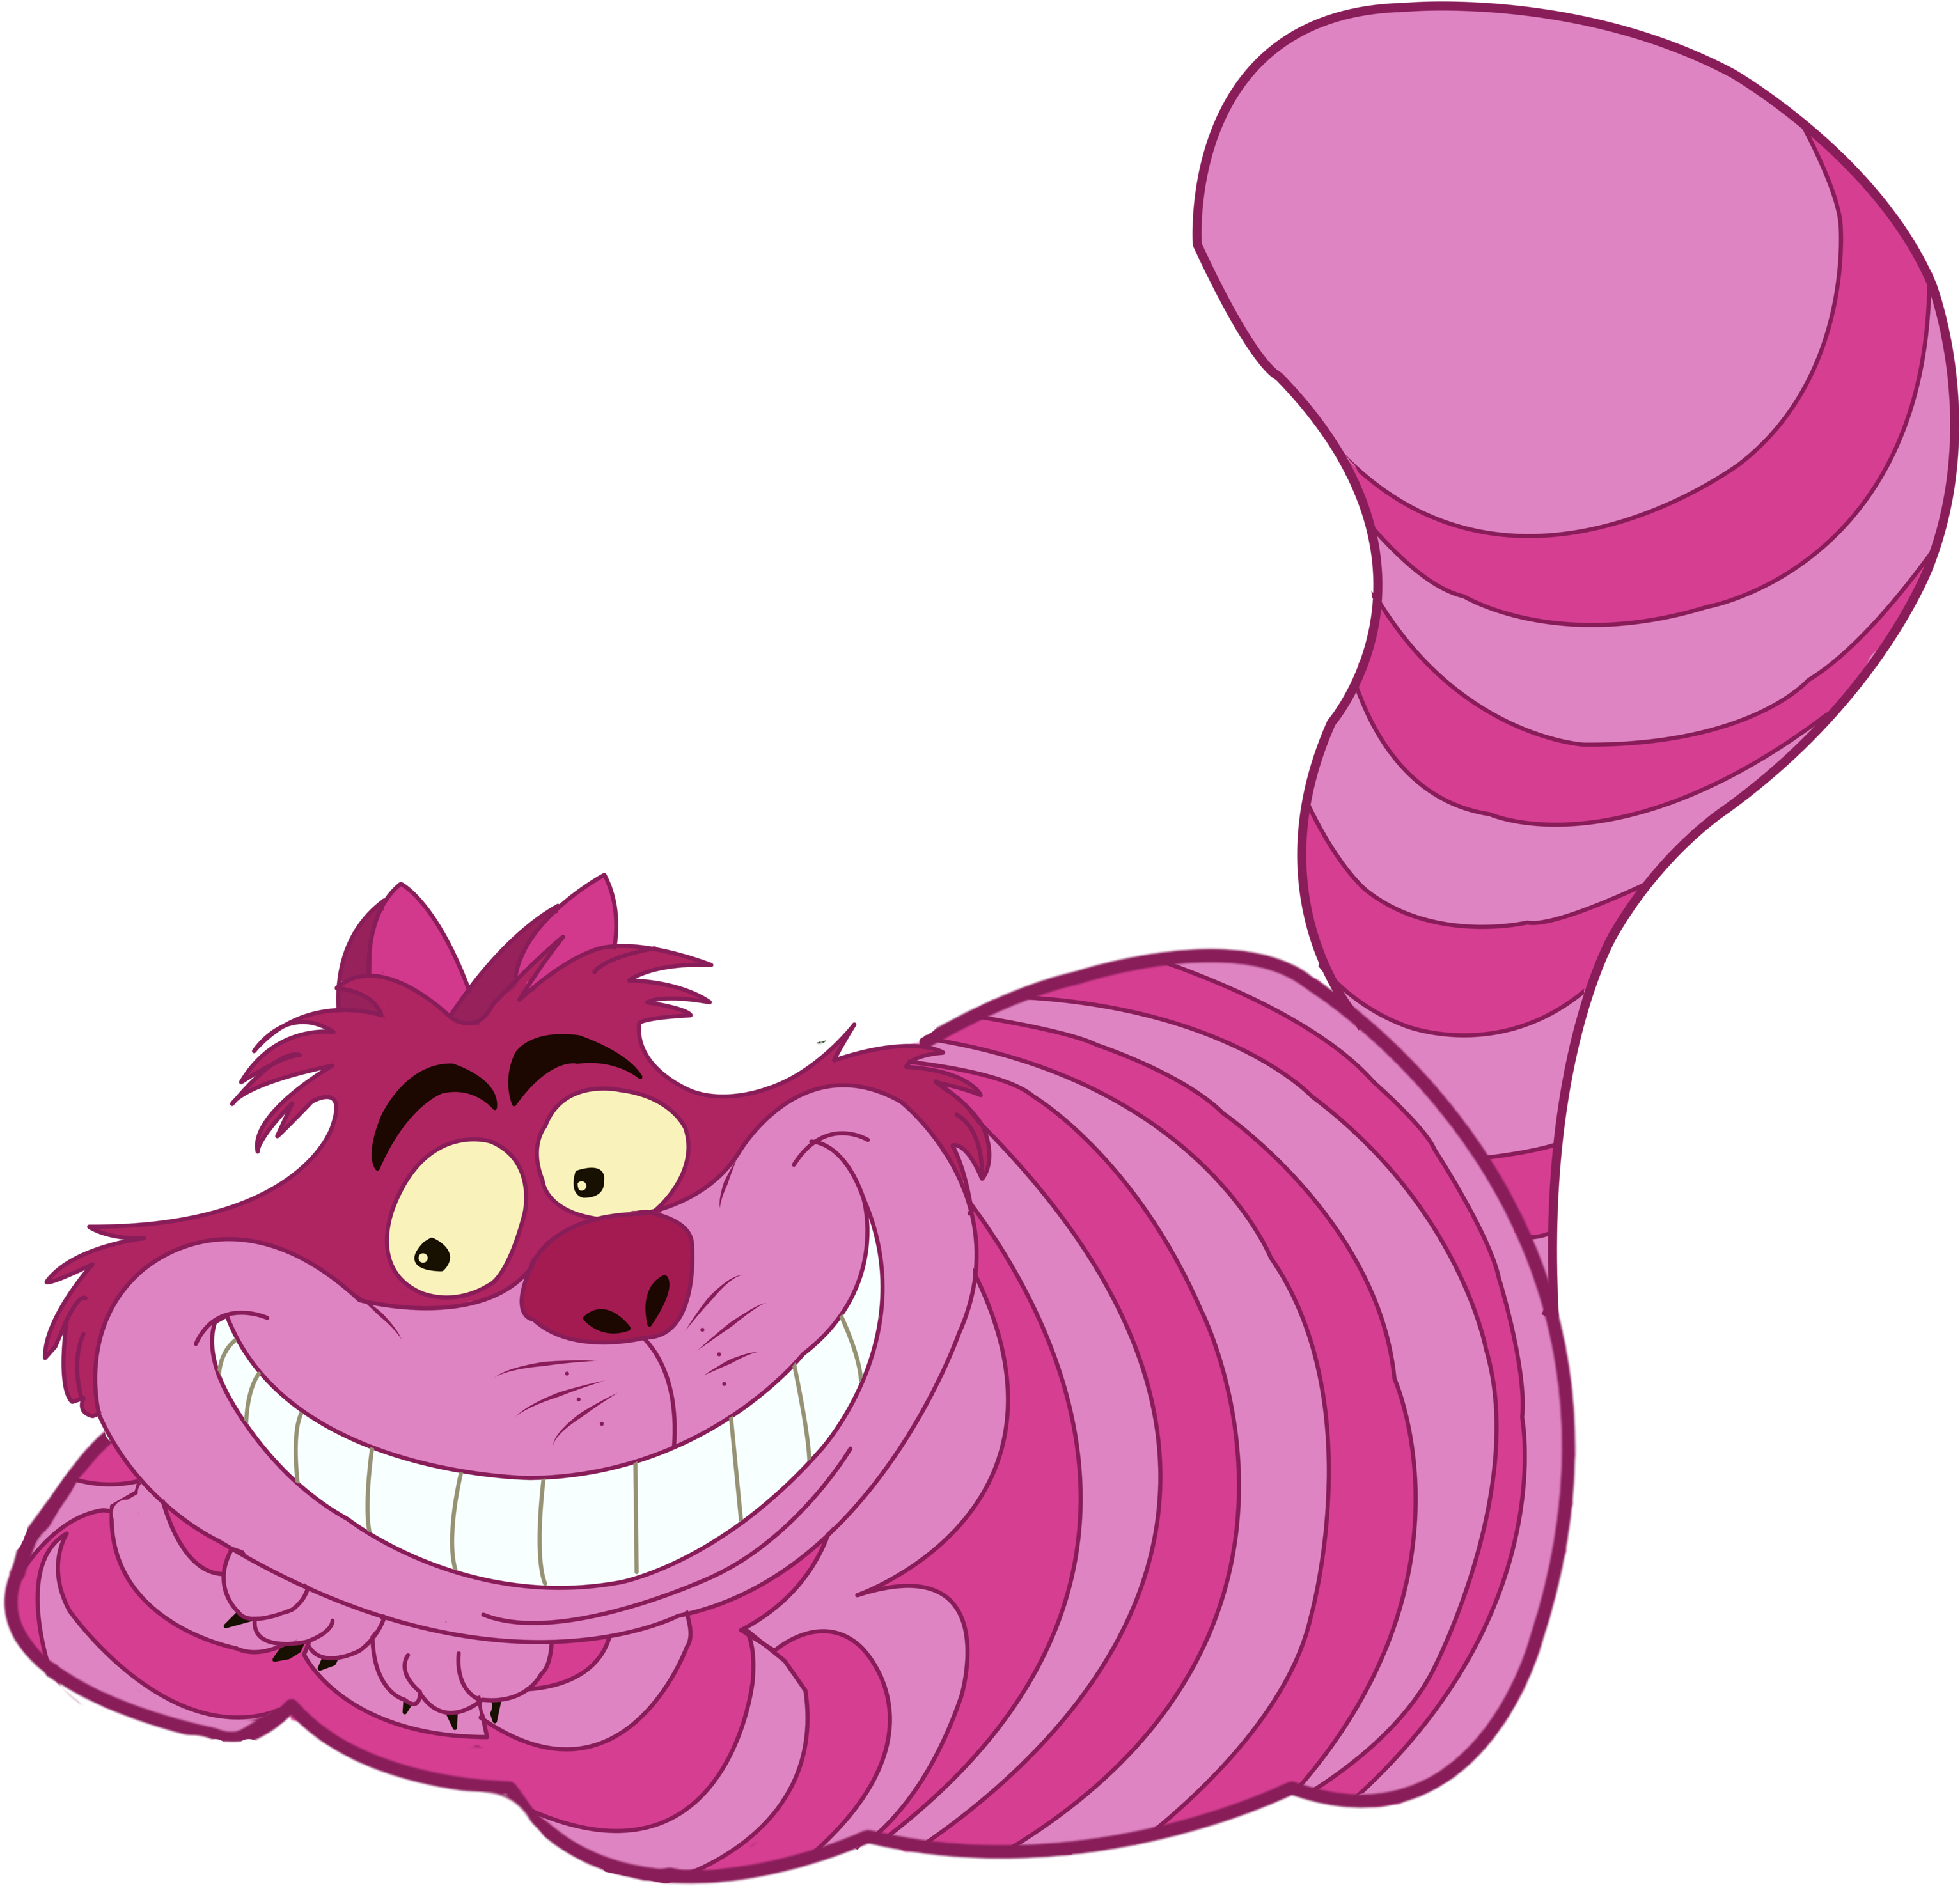 Download and share clipart about The Mad Hatter Cheshire Cat Alice In Wonde...